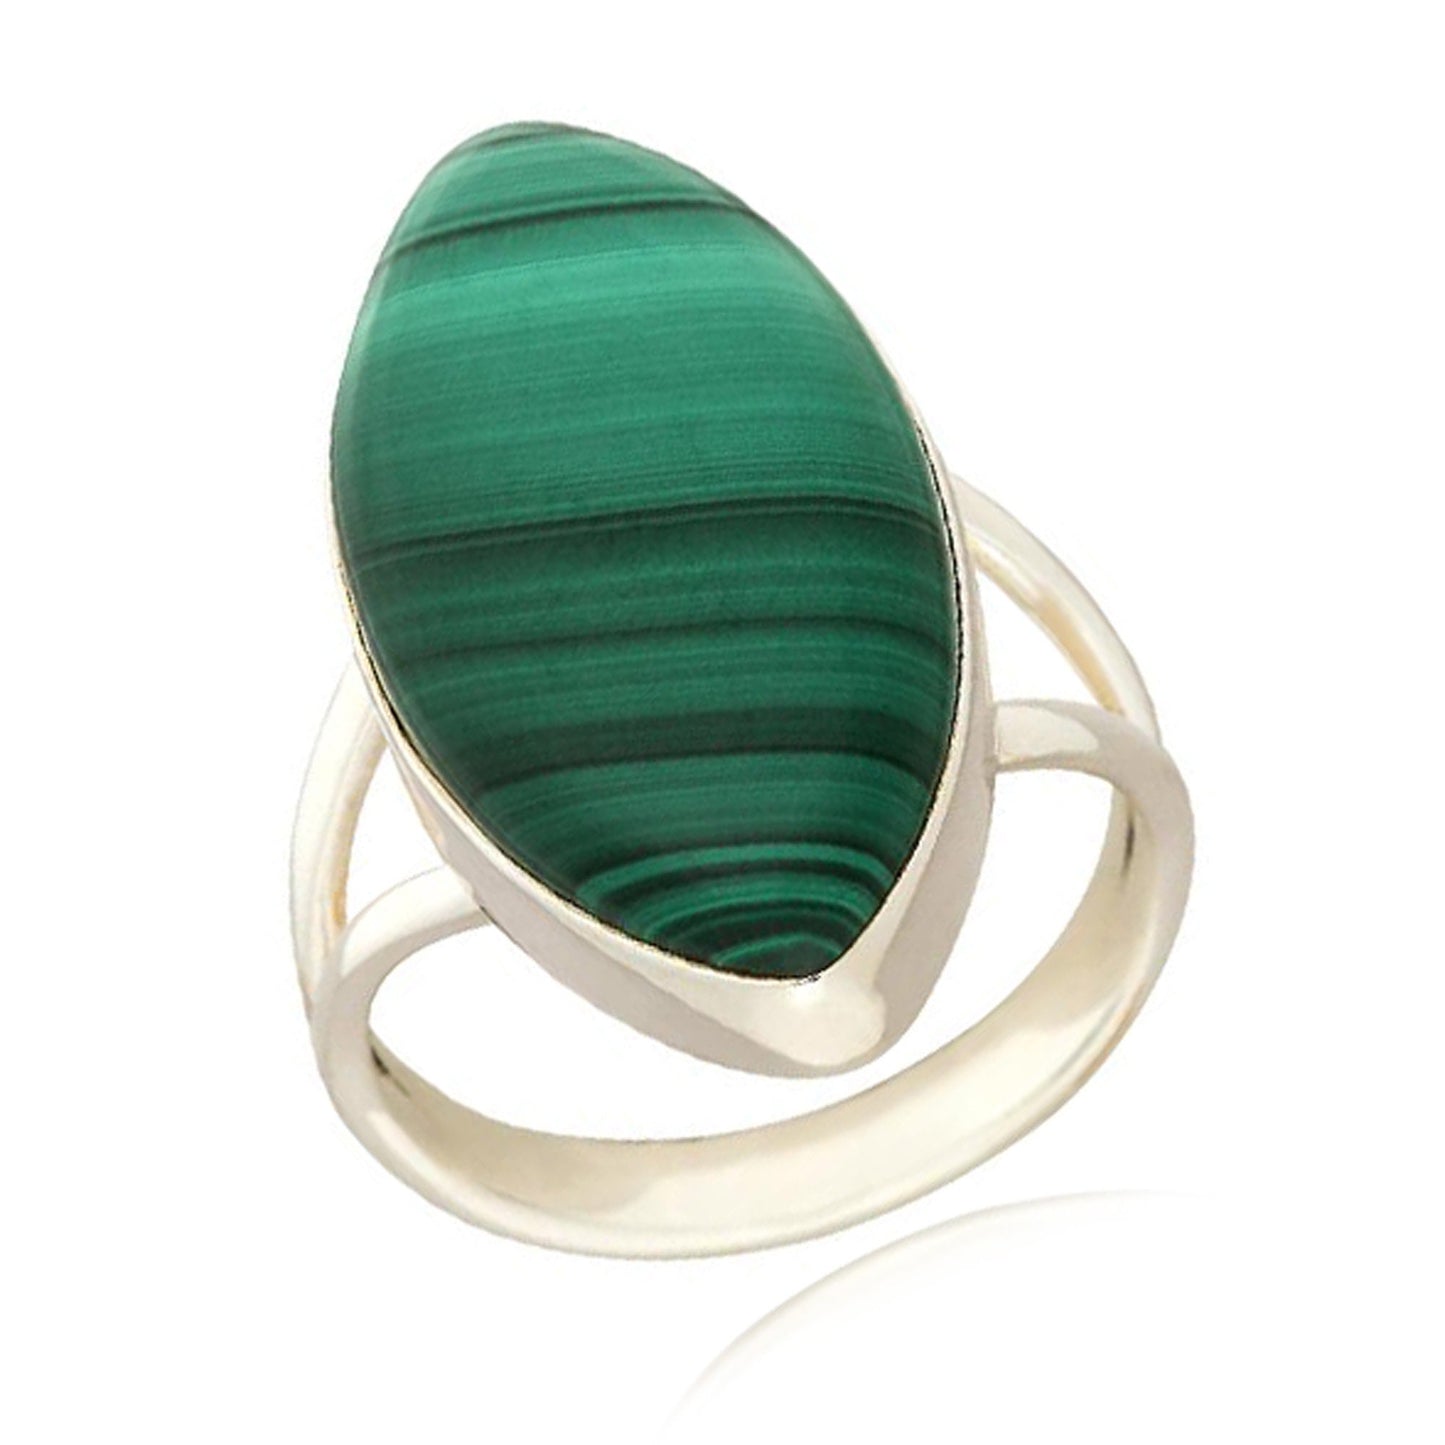 Natural Malachite Gemstone Ring 925 Sterling Silver Ring Boho And Hippie Ring For Women Solitaire Ring Fine Jewelry Gift For Her